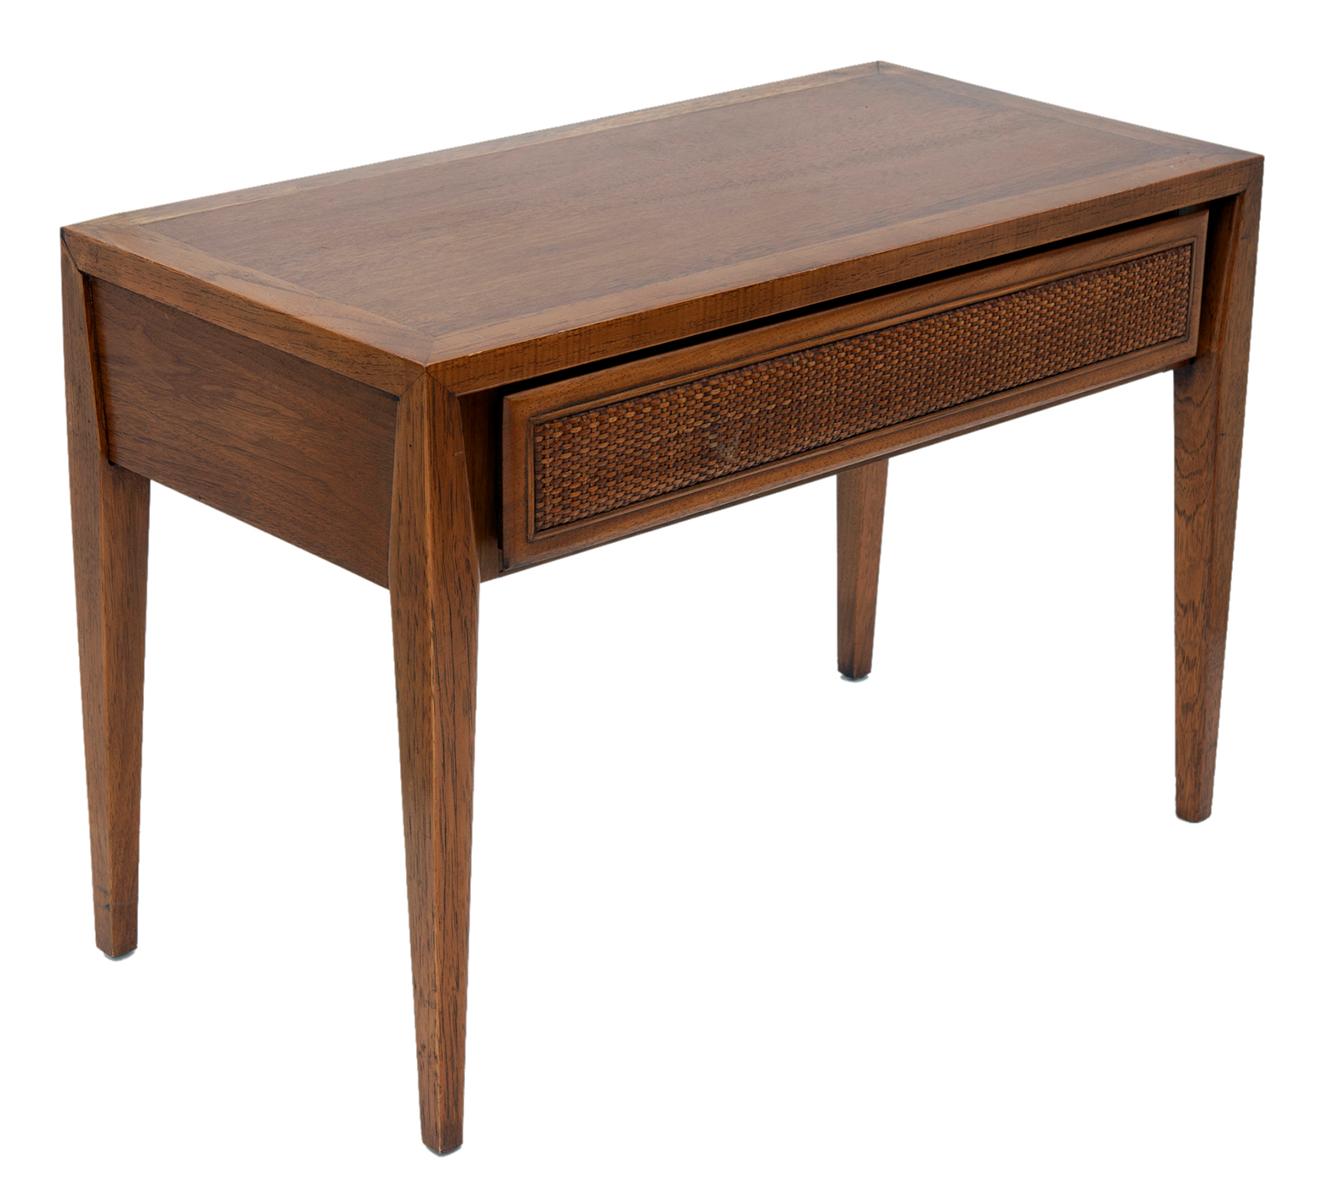 Midcentury Walnut Table with Wicker Drawer by Century In Good Condition For Sale In Malibu, CA